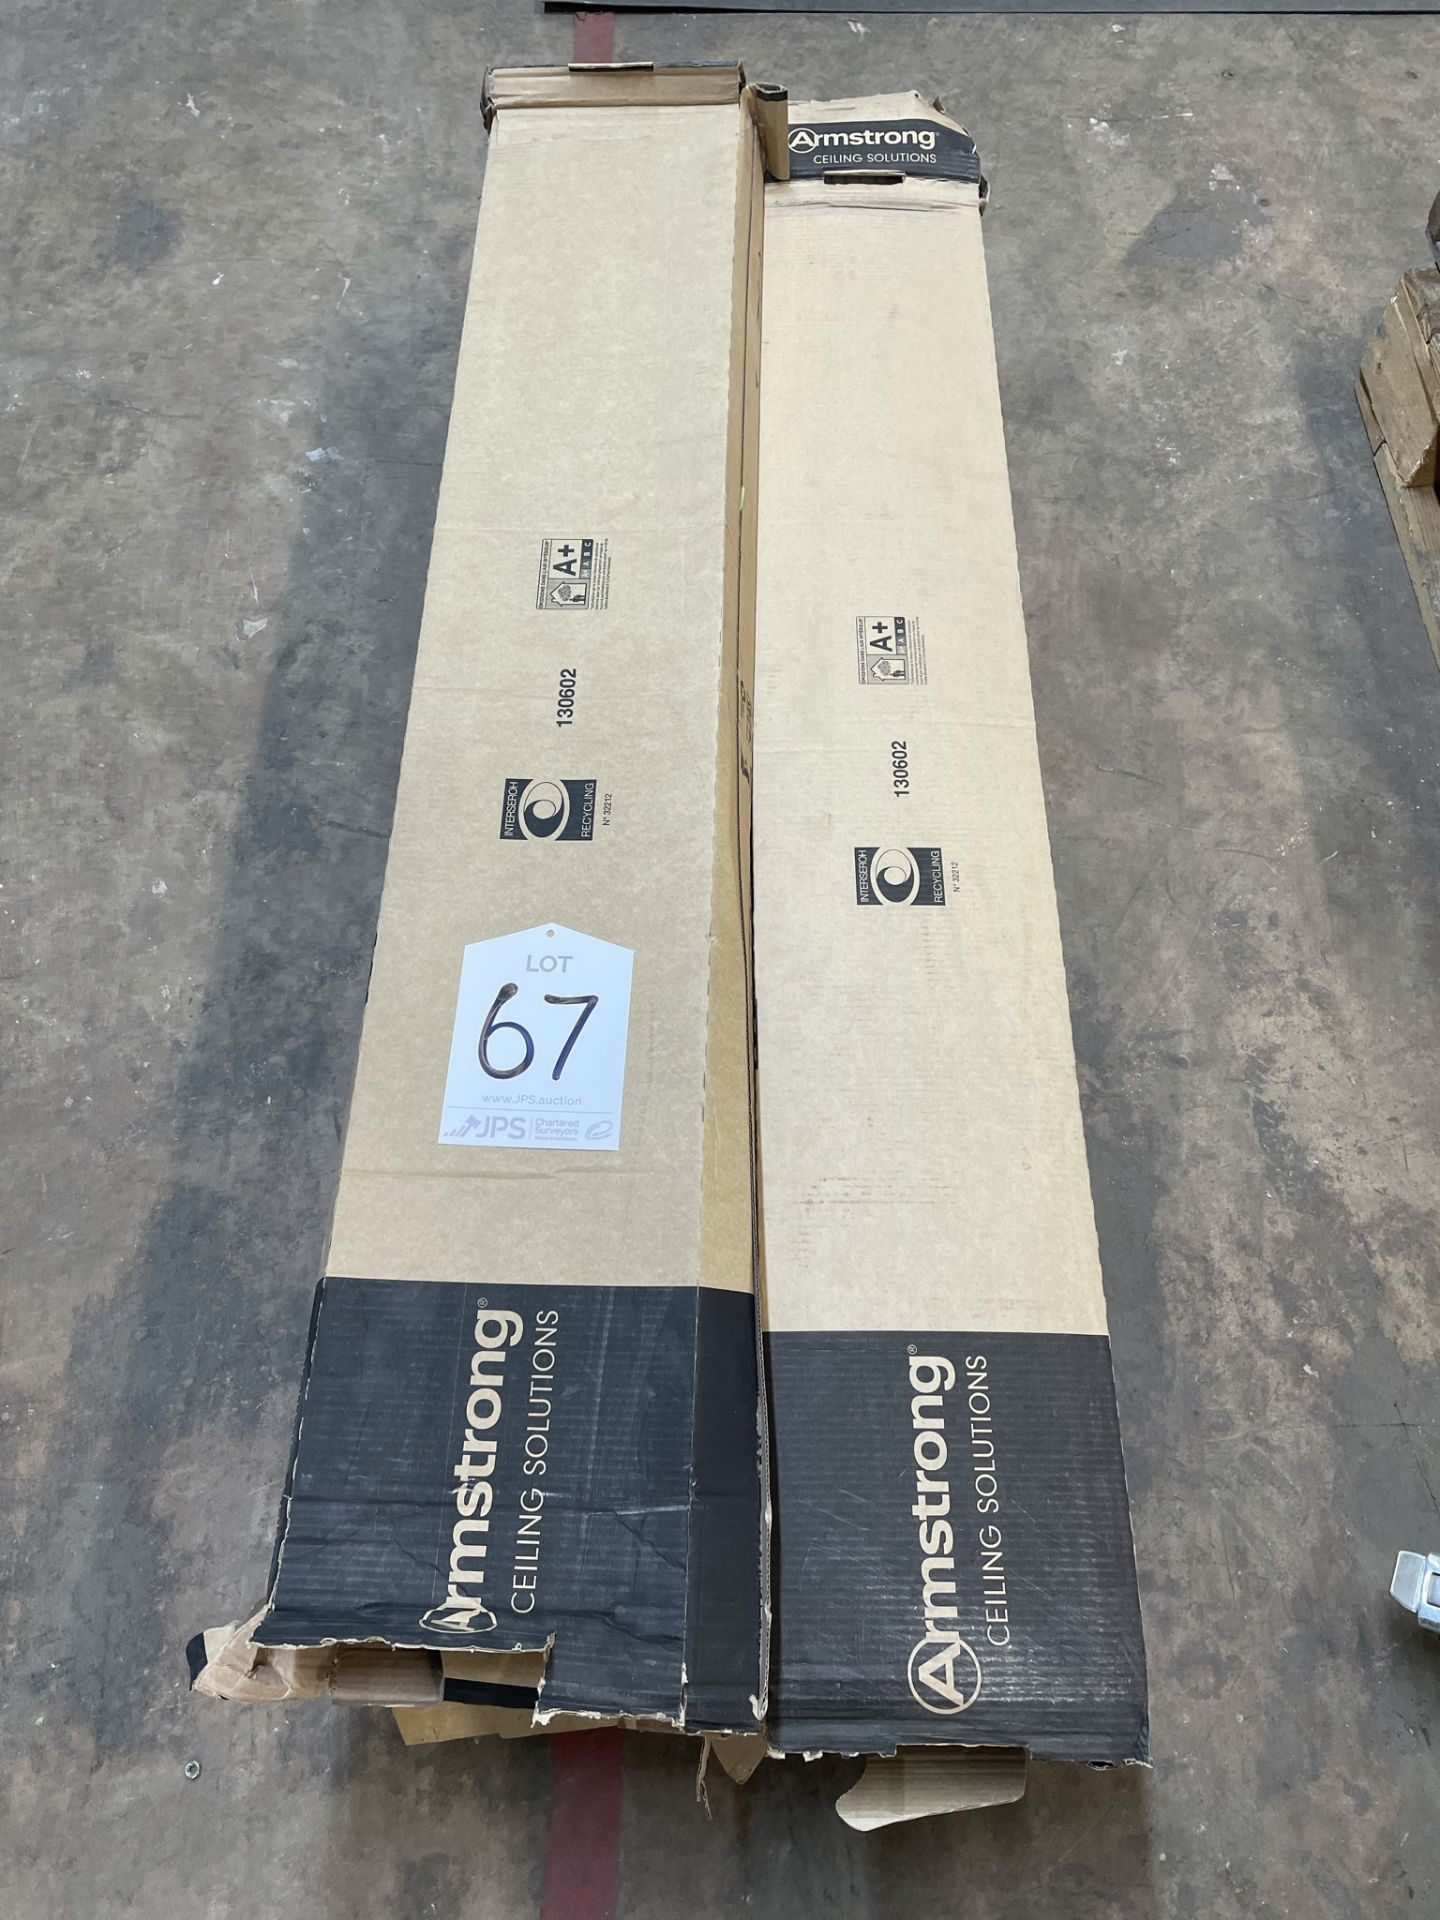 7 x Boxes of Armstrong Prelude 24 XL Ceiling Grid Cross Joiners | 1200mm